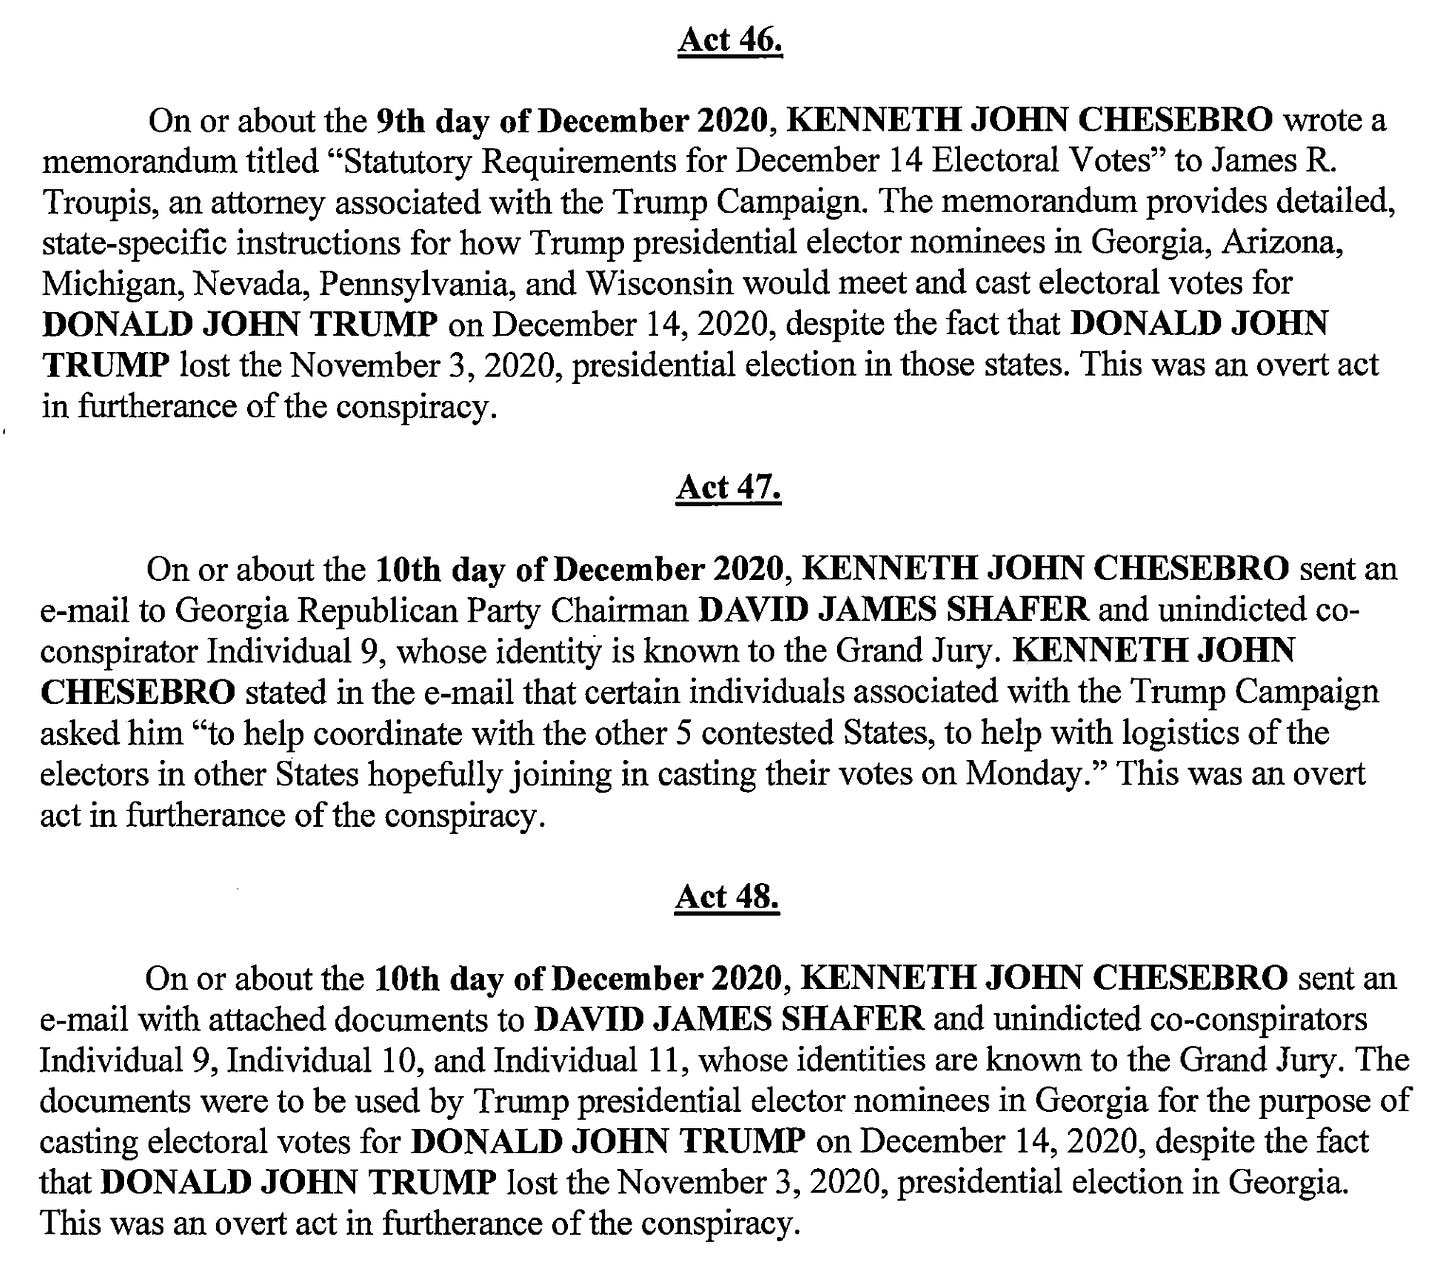 Act 46. On or about the 9th day of December 2020, KENNETH JOHN CHESEBRO wrote a memorandum titled "Statutory Requirements for December 14 Electoral Votes" to James R. Troupis, an attorney associated with the Trump Campaign. The memorandum provides detailed, state-specific instructions for how Trurnp presidential elector nominees in Georgia, Arizona, Michigan, Nevada, Pennsylvania, and Wisconsin would meet and cast electoral votes for DONALD JOHN TRUMP on December l4, 2020, despite the fact that DONALD JOHN TRUMP lost the November 3, 2020, presidential election in those states. This was an overt act in flirtherance of the conspiracy. Act 47. On or about the 10th day of December 2020, KENNETH JOHN CHESEBRO sent an e-mail to Georgia Republican Party Chairman DAVID JAMES SHAFER and unindicted co- conspirator Individual 9, whose identity is known to the Grand Jury. KENNETH JOHN CHESEBRO stated in the e-mail that certain individuals associated with the Trump Campaign asked him "to help coordinate with the other 5 contested States, to help With logistics of the electors in other States hopefully joining in casting their votes on Monday." This was an overt act in furtherance of the conspiracy. Act 48. On or about the 10th day of December 2020, KENNETH JOHN CHESEBRO sent an e-mail with attached documents to DAVID JAMES SHAFER and unindicted co-conspirators Individual 9, Individual 10, and Individual 11, whose identities are known to the Grand Jury. The documents were to be used by Trump presidential elector nominees in Georgia for the purpose of casting electoral votes for DONALD JOHN TRUW on December 14, 2020, despite the fact that DONALD JOHN TRUMP lost the November 3, 2020, presidential election in Georgia. This was an overt act in furtherance of the conspiracy.